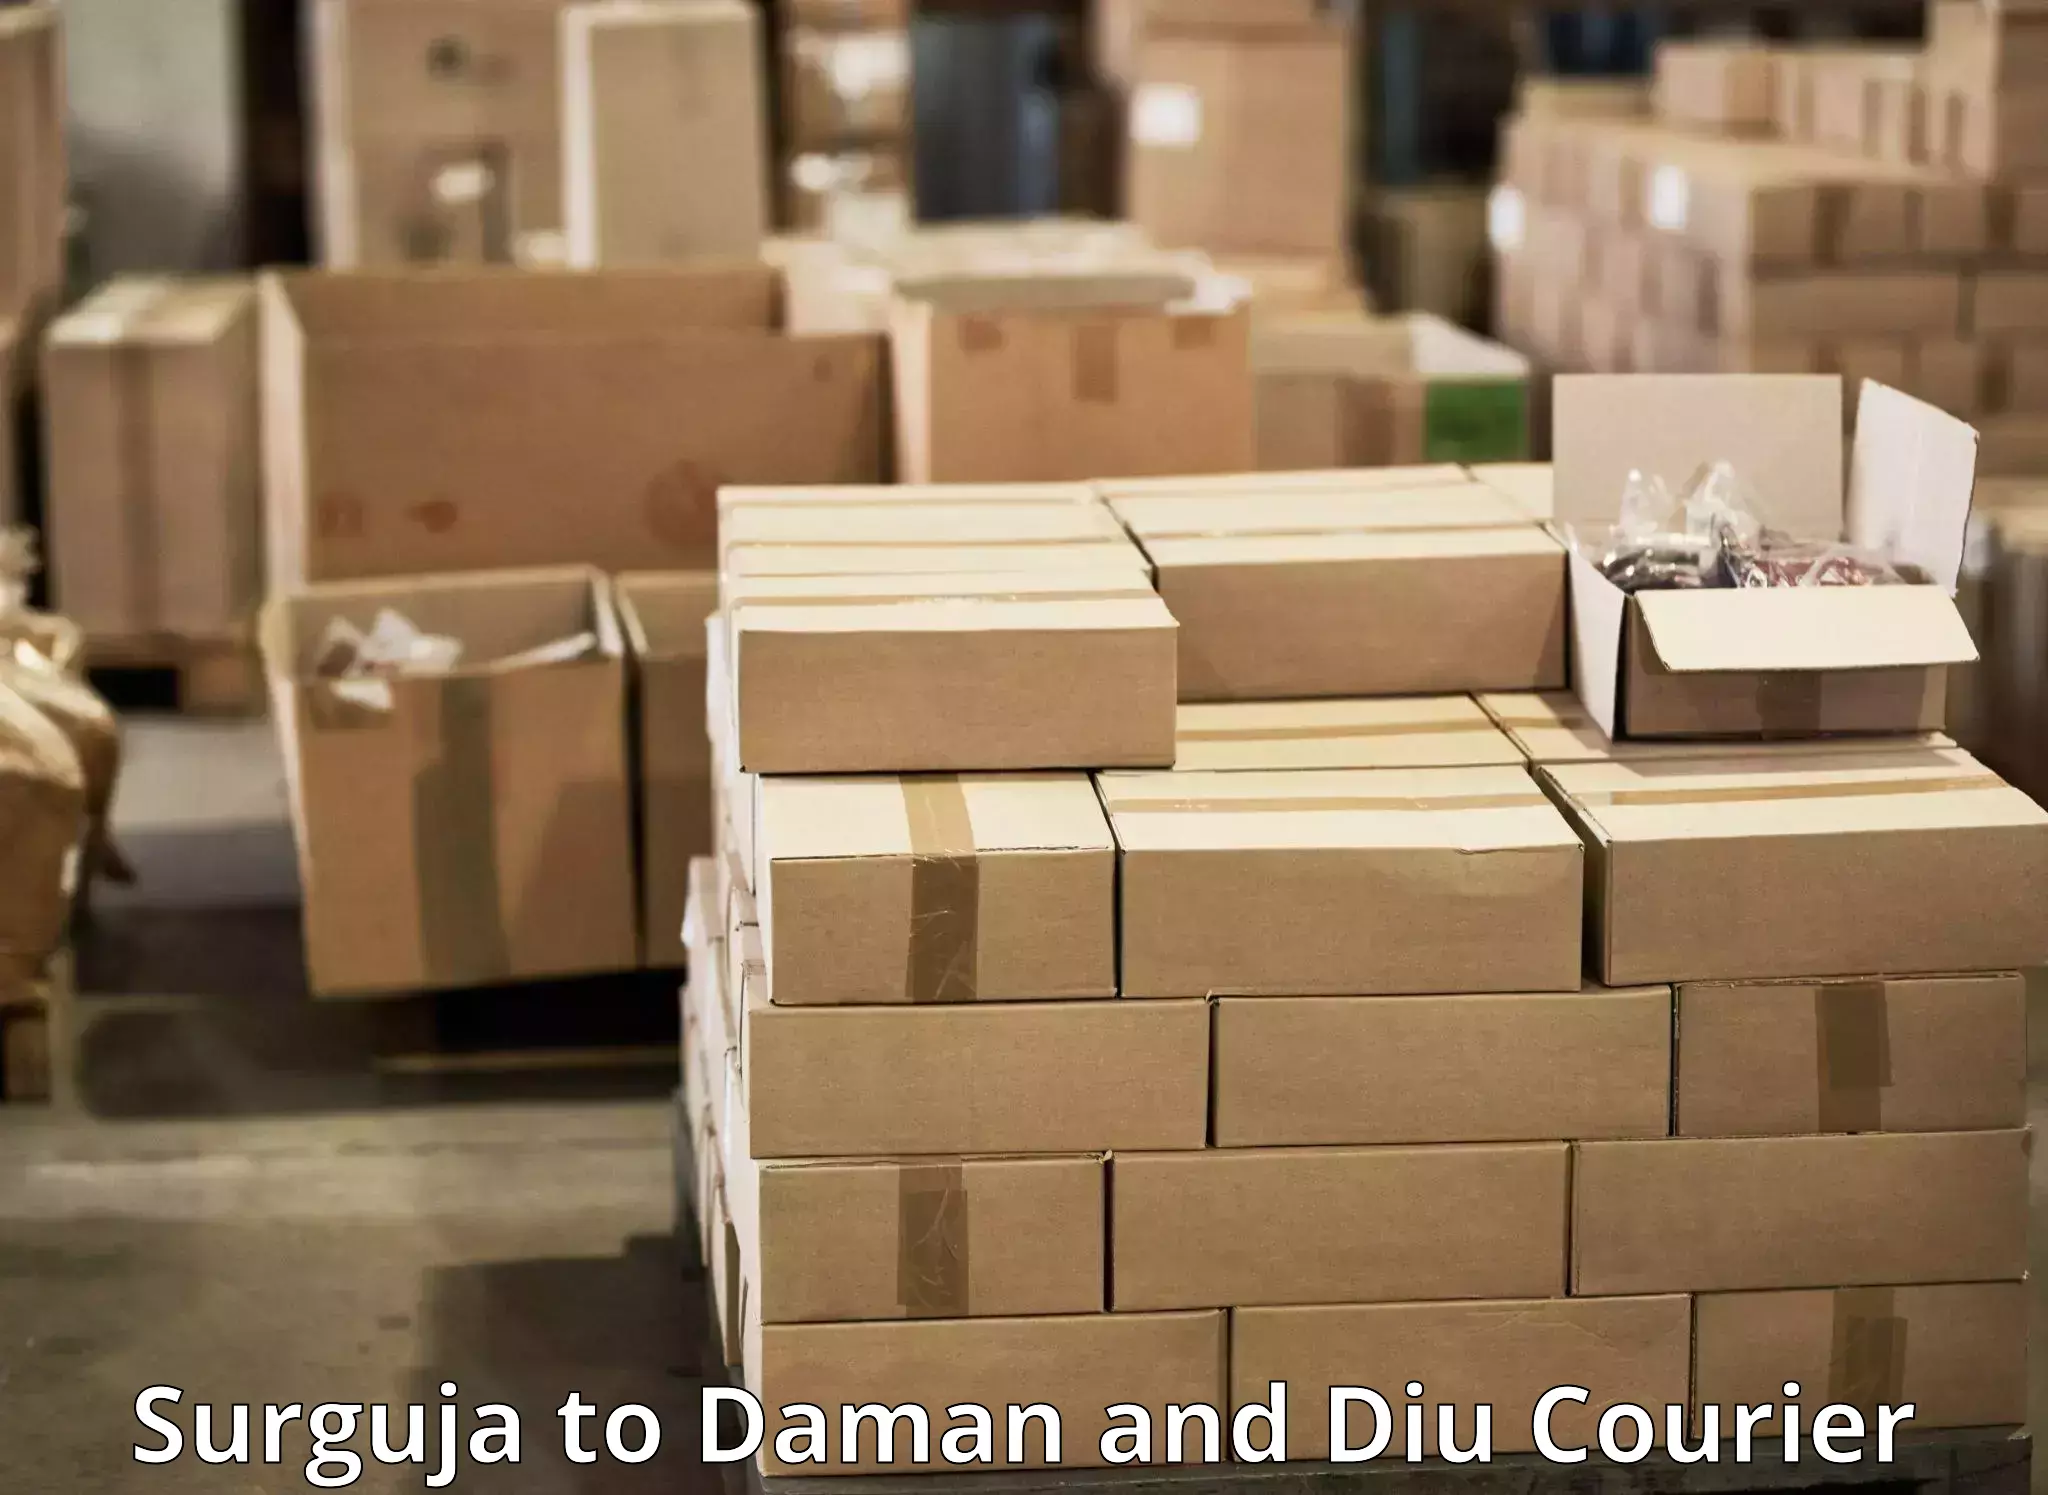 Next-day freight services Surguja to Daman and Diu